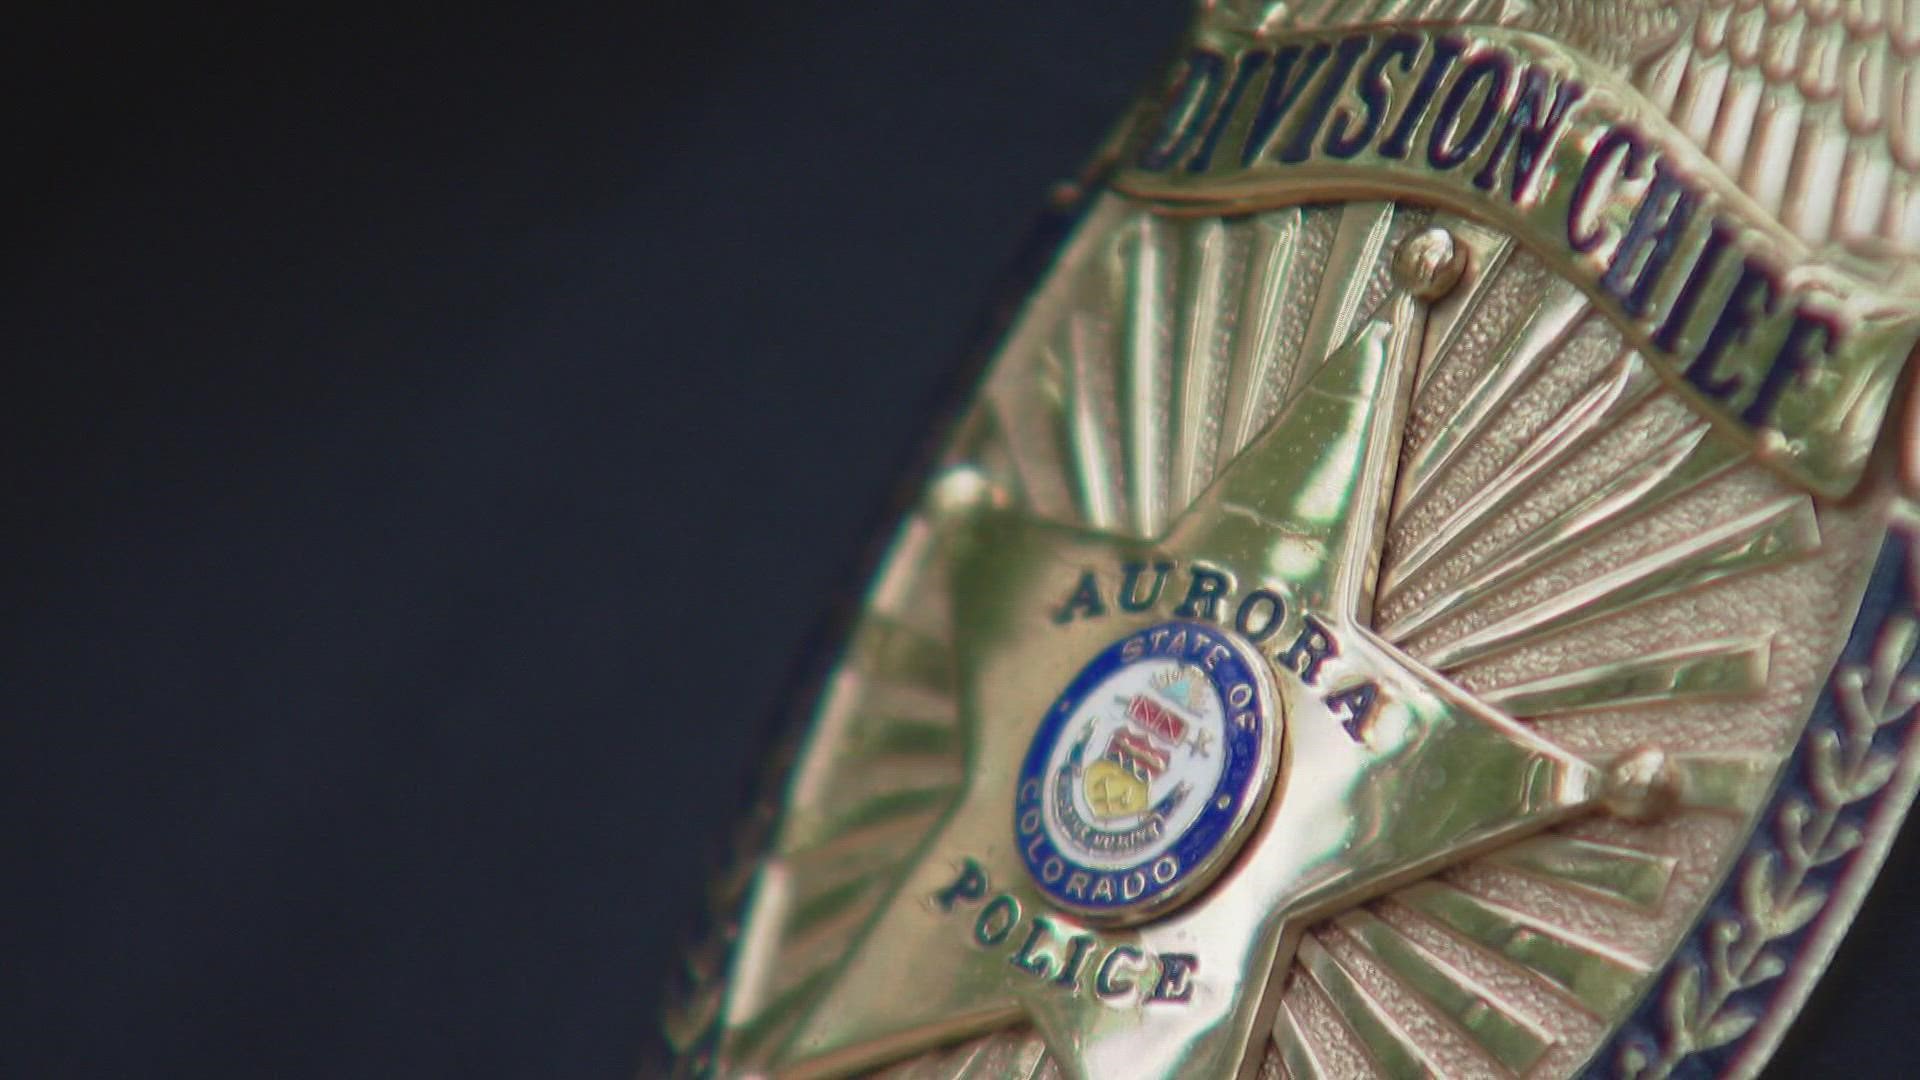 In an effort to solve staffing shortages, Aurora PD is now broadening the requirements so that more people can apply.